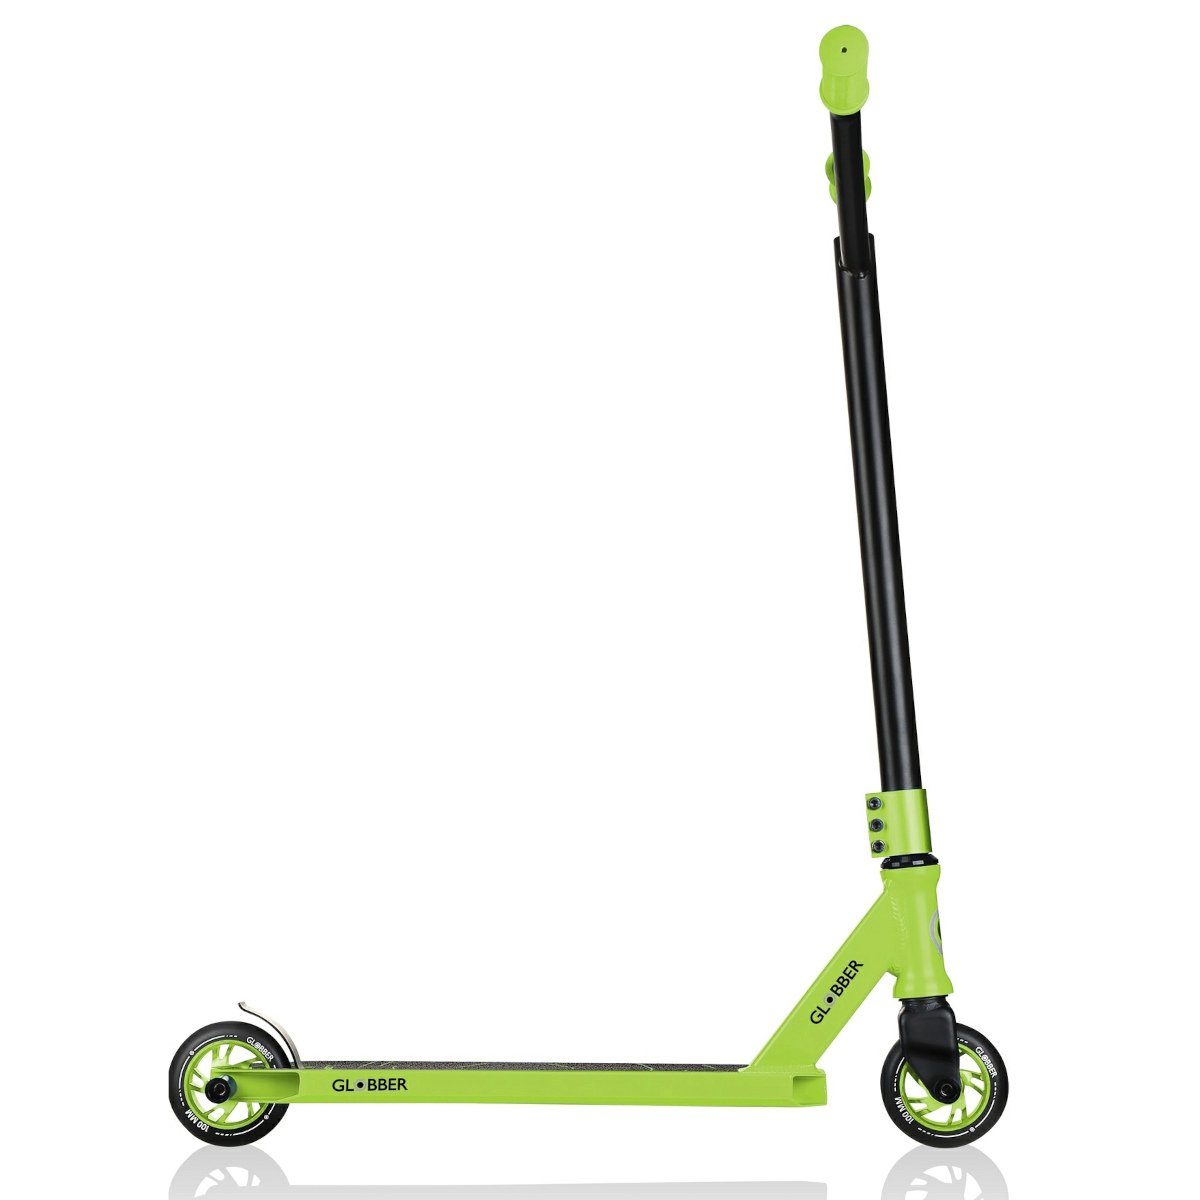 authentic Laufrad Stuntscooter Sports Grün sports Schwarz-Lime Globber Authentic GS 540 toys &